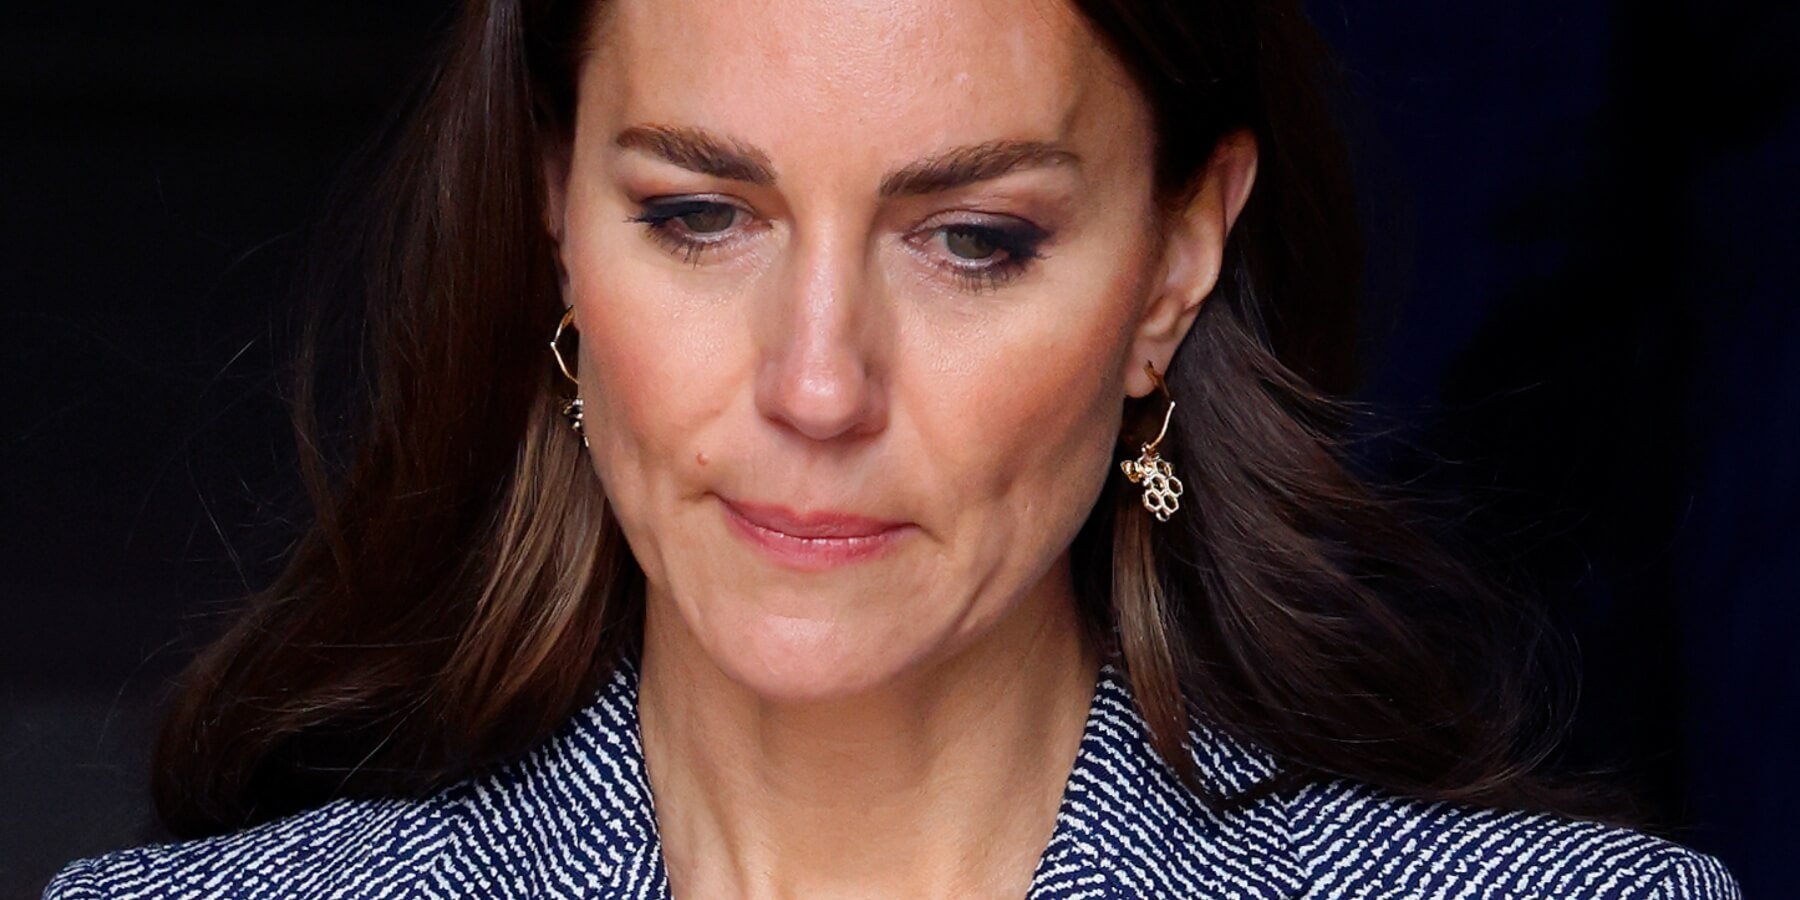 Kate Middleton is 'taking the fall' for royal family photo editing mishap says commentator